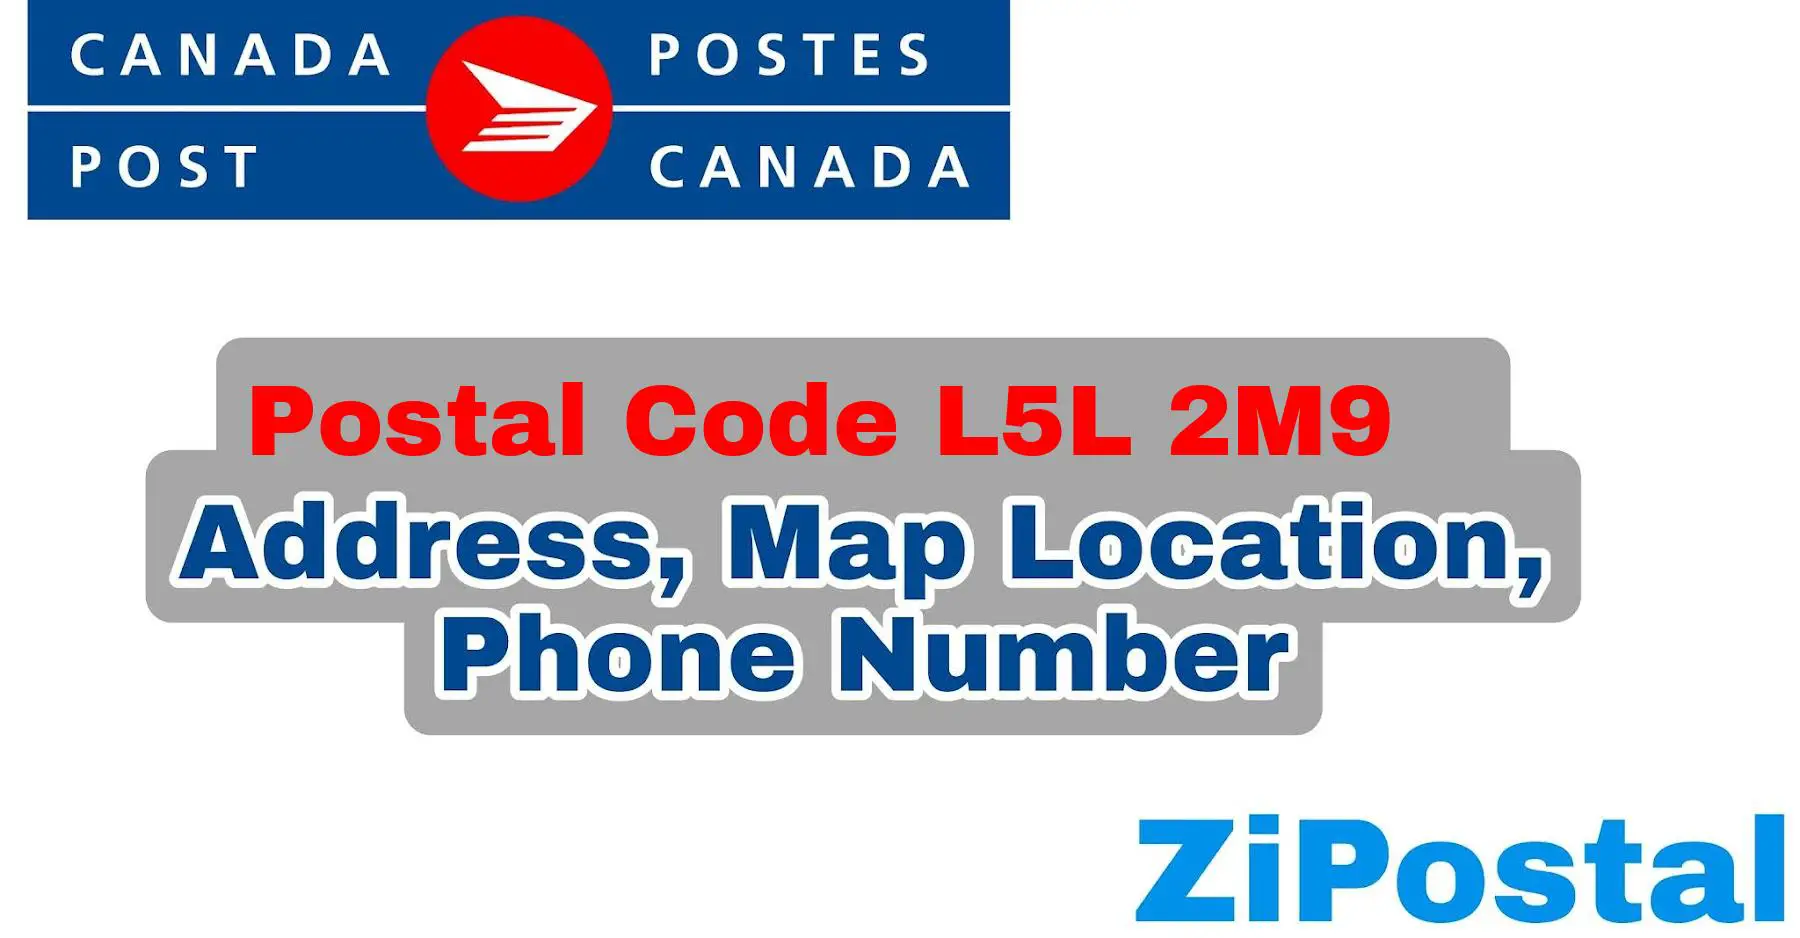 Postal Code L5L 2M9 Address Map Location and Phone Number